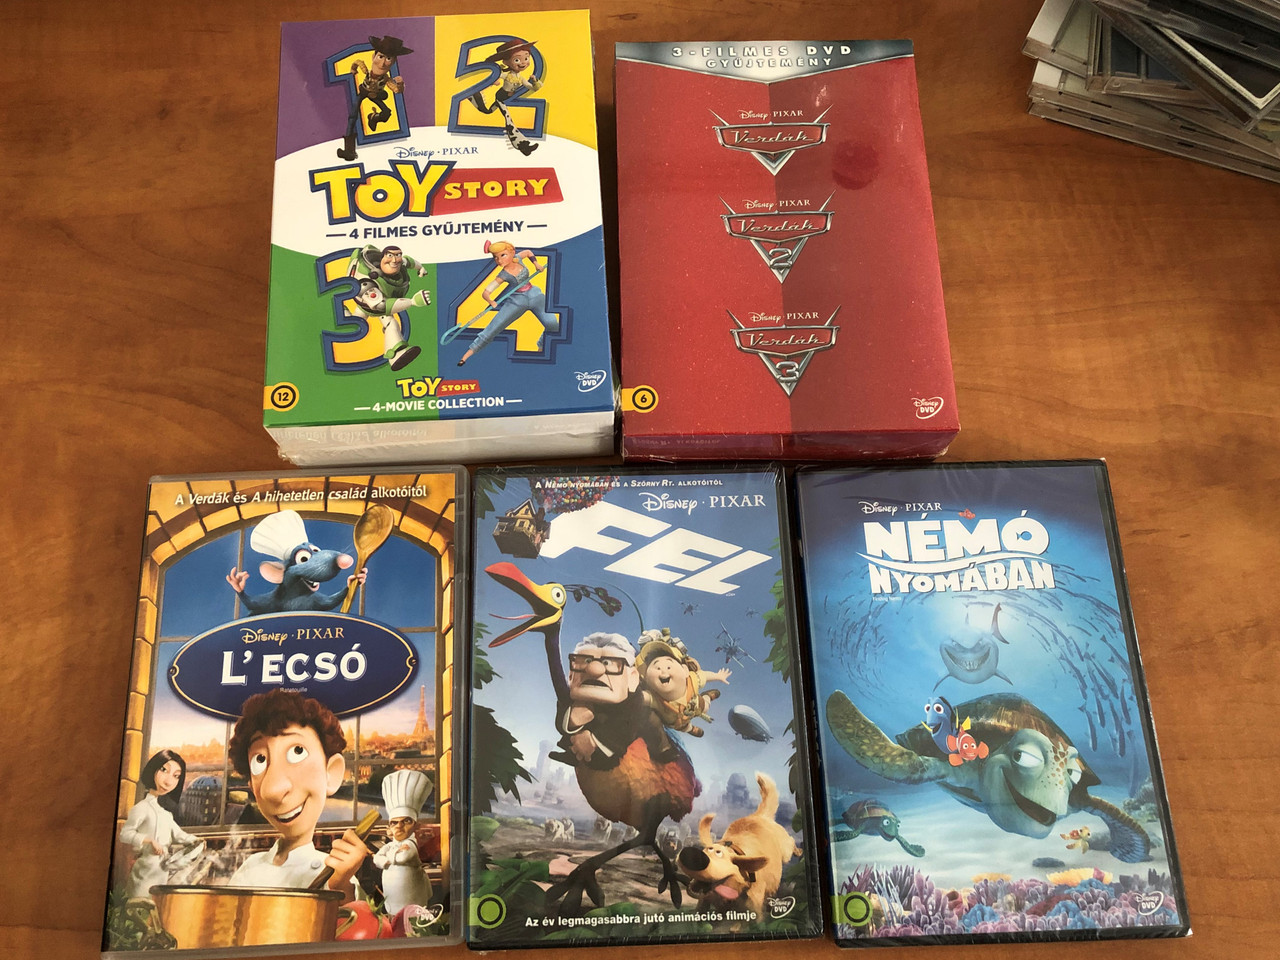 Special Disney DVD selection from Hungary: Toy Story 1, 2. 3, 4 / Cars  1,2,3 / UP / Nemo / Ratatouille - bibleinmylanguage